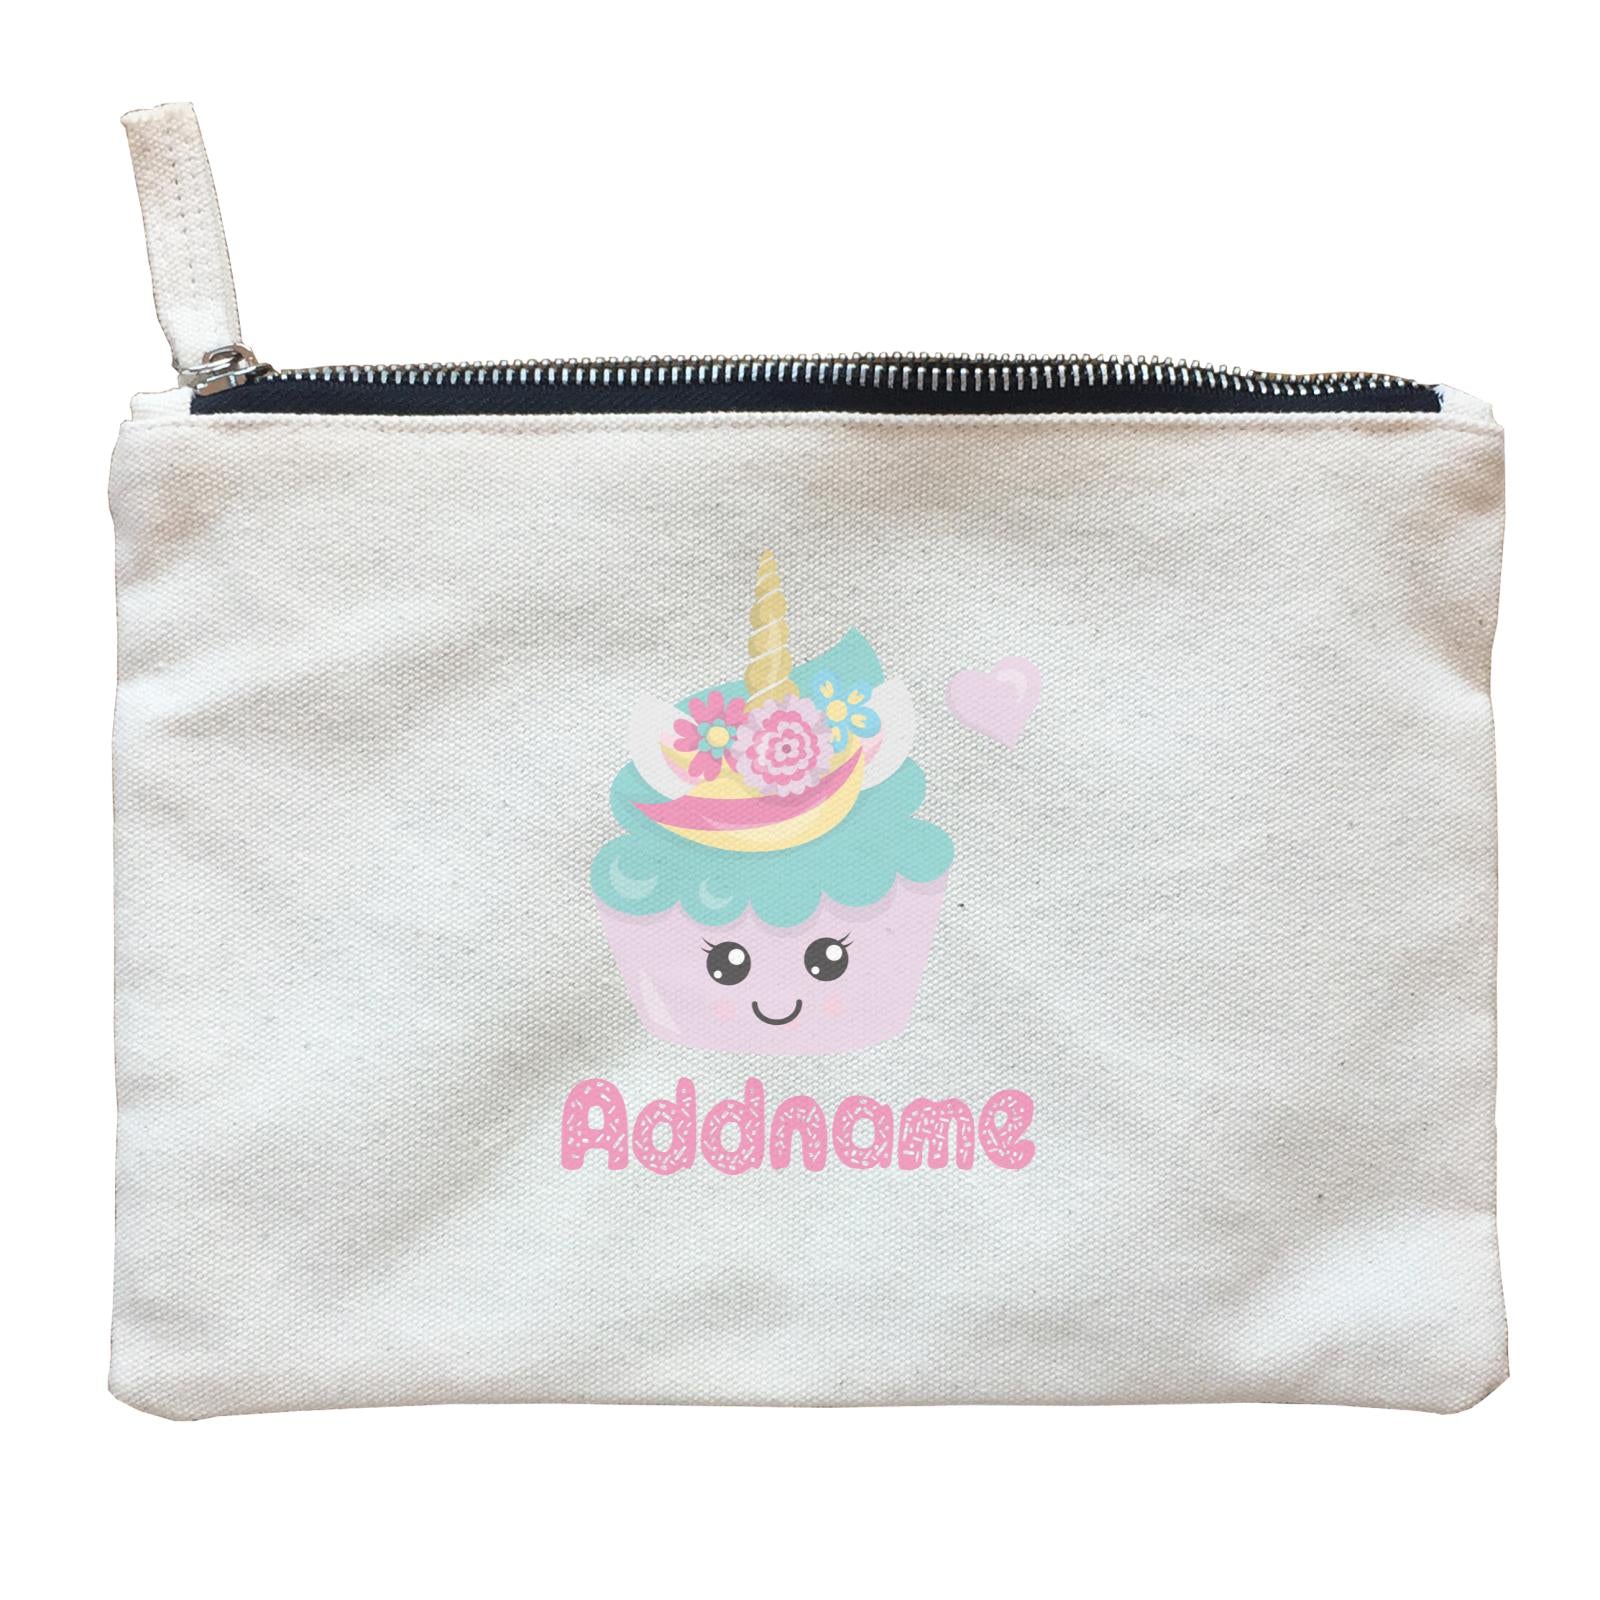 Magical Sweets Purple Cupcake Addname Zipper Pouch